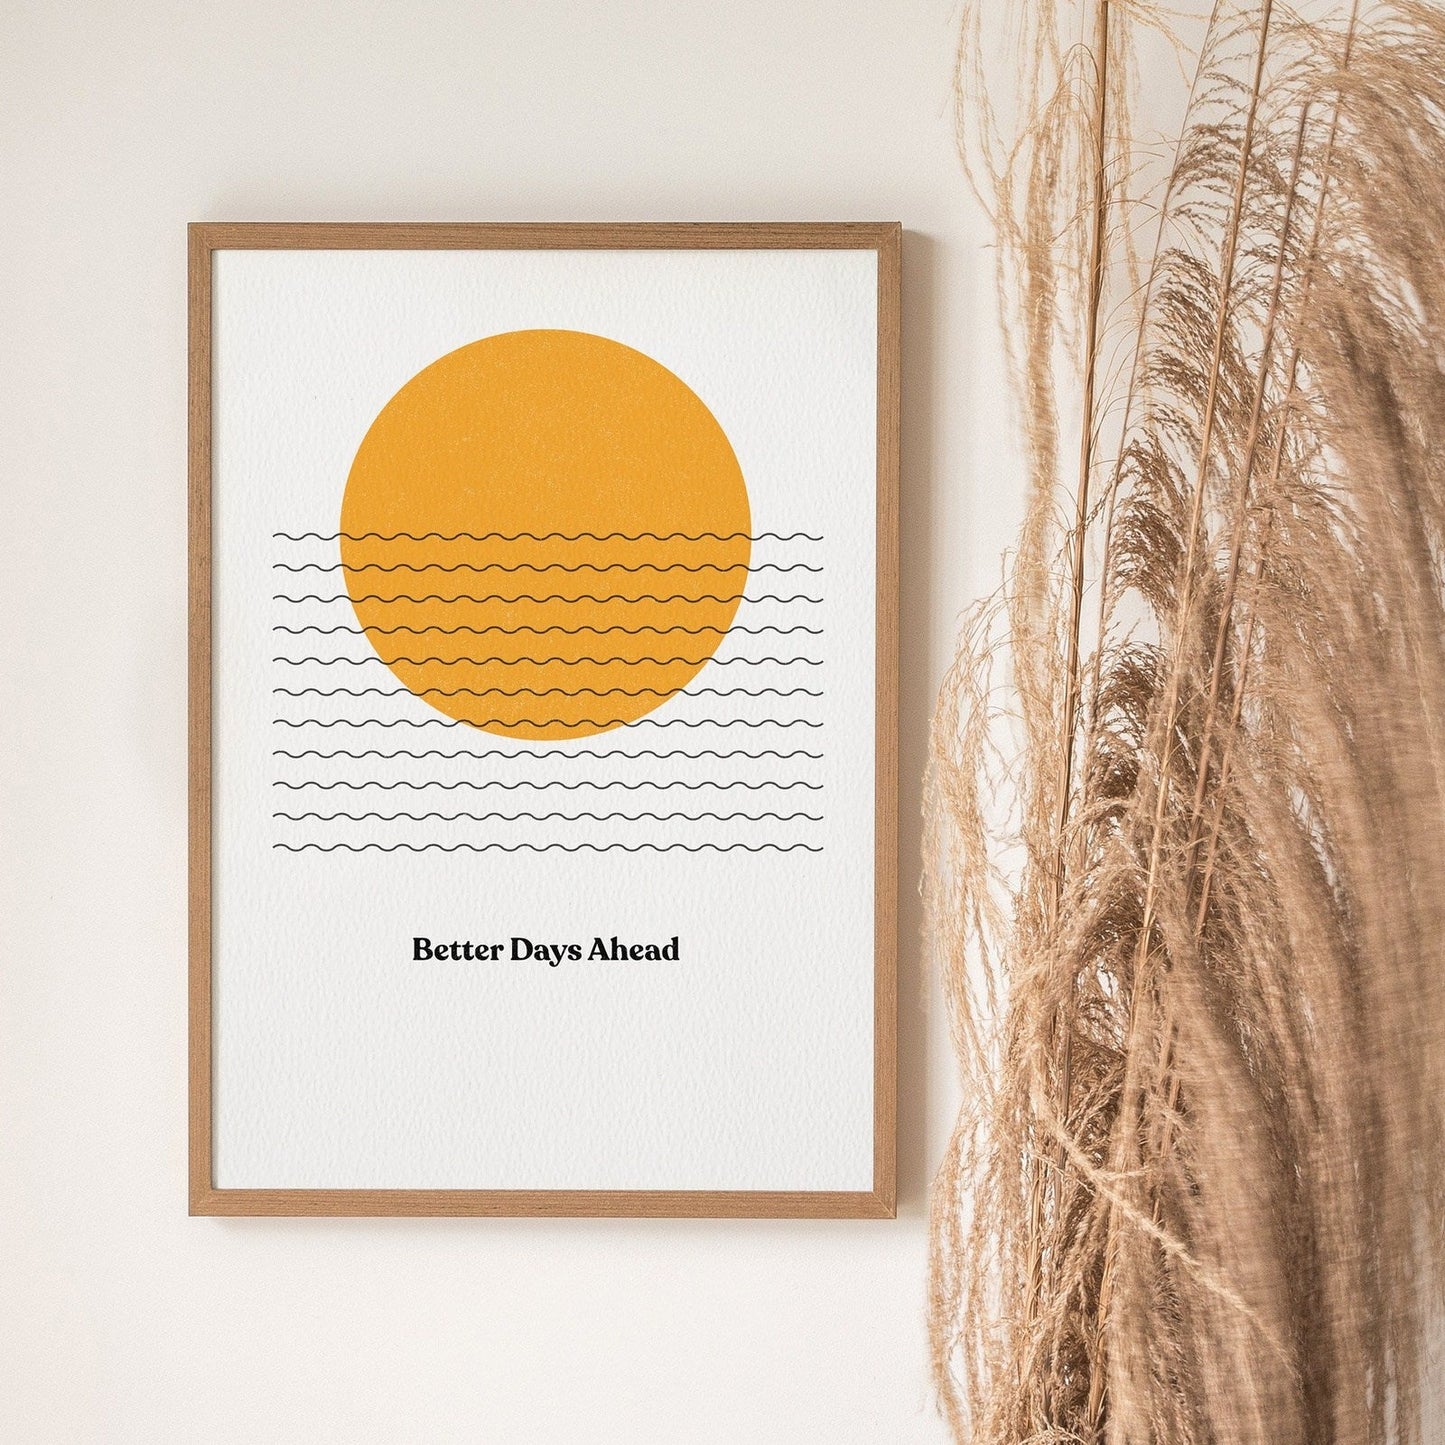 'Better Days Ahead' Graphic Print